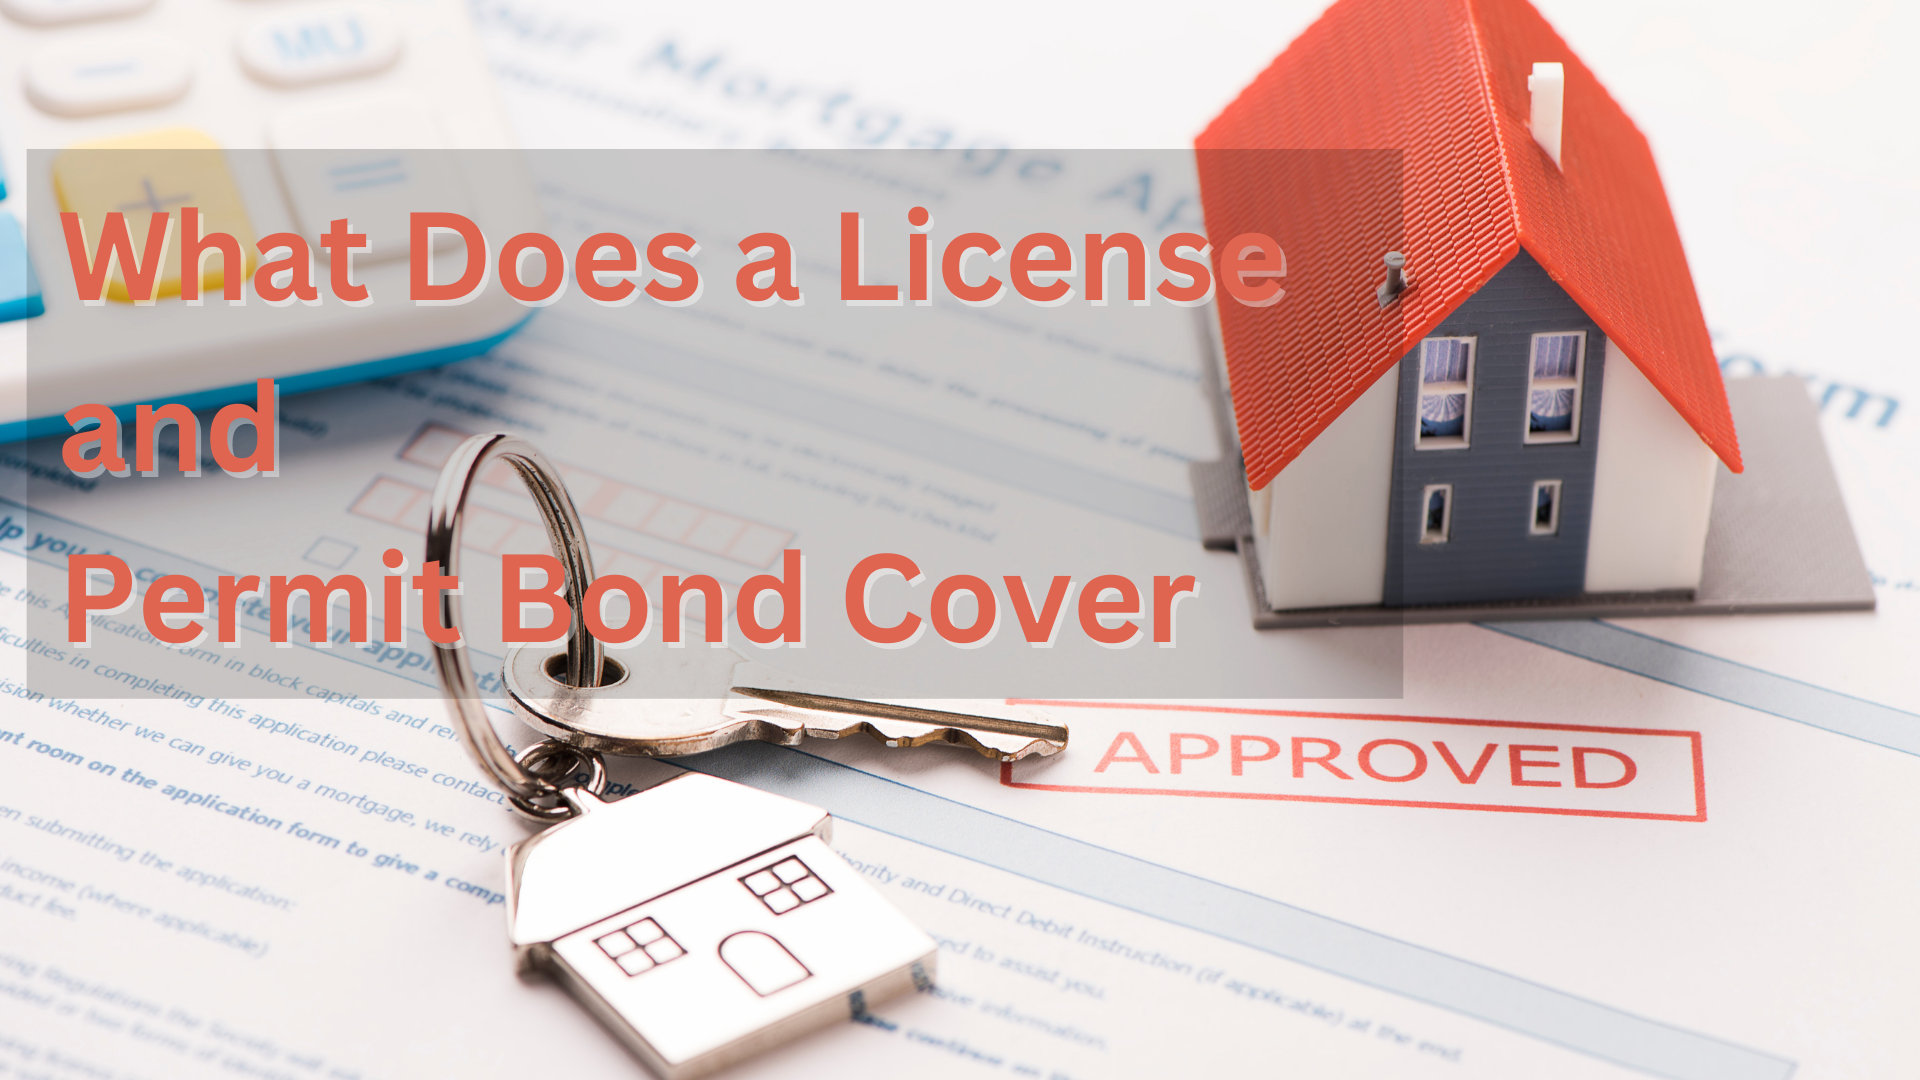 What Does a License and Permit Bond Cover